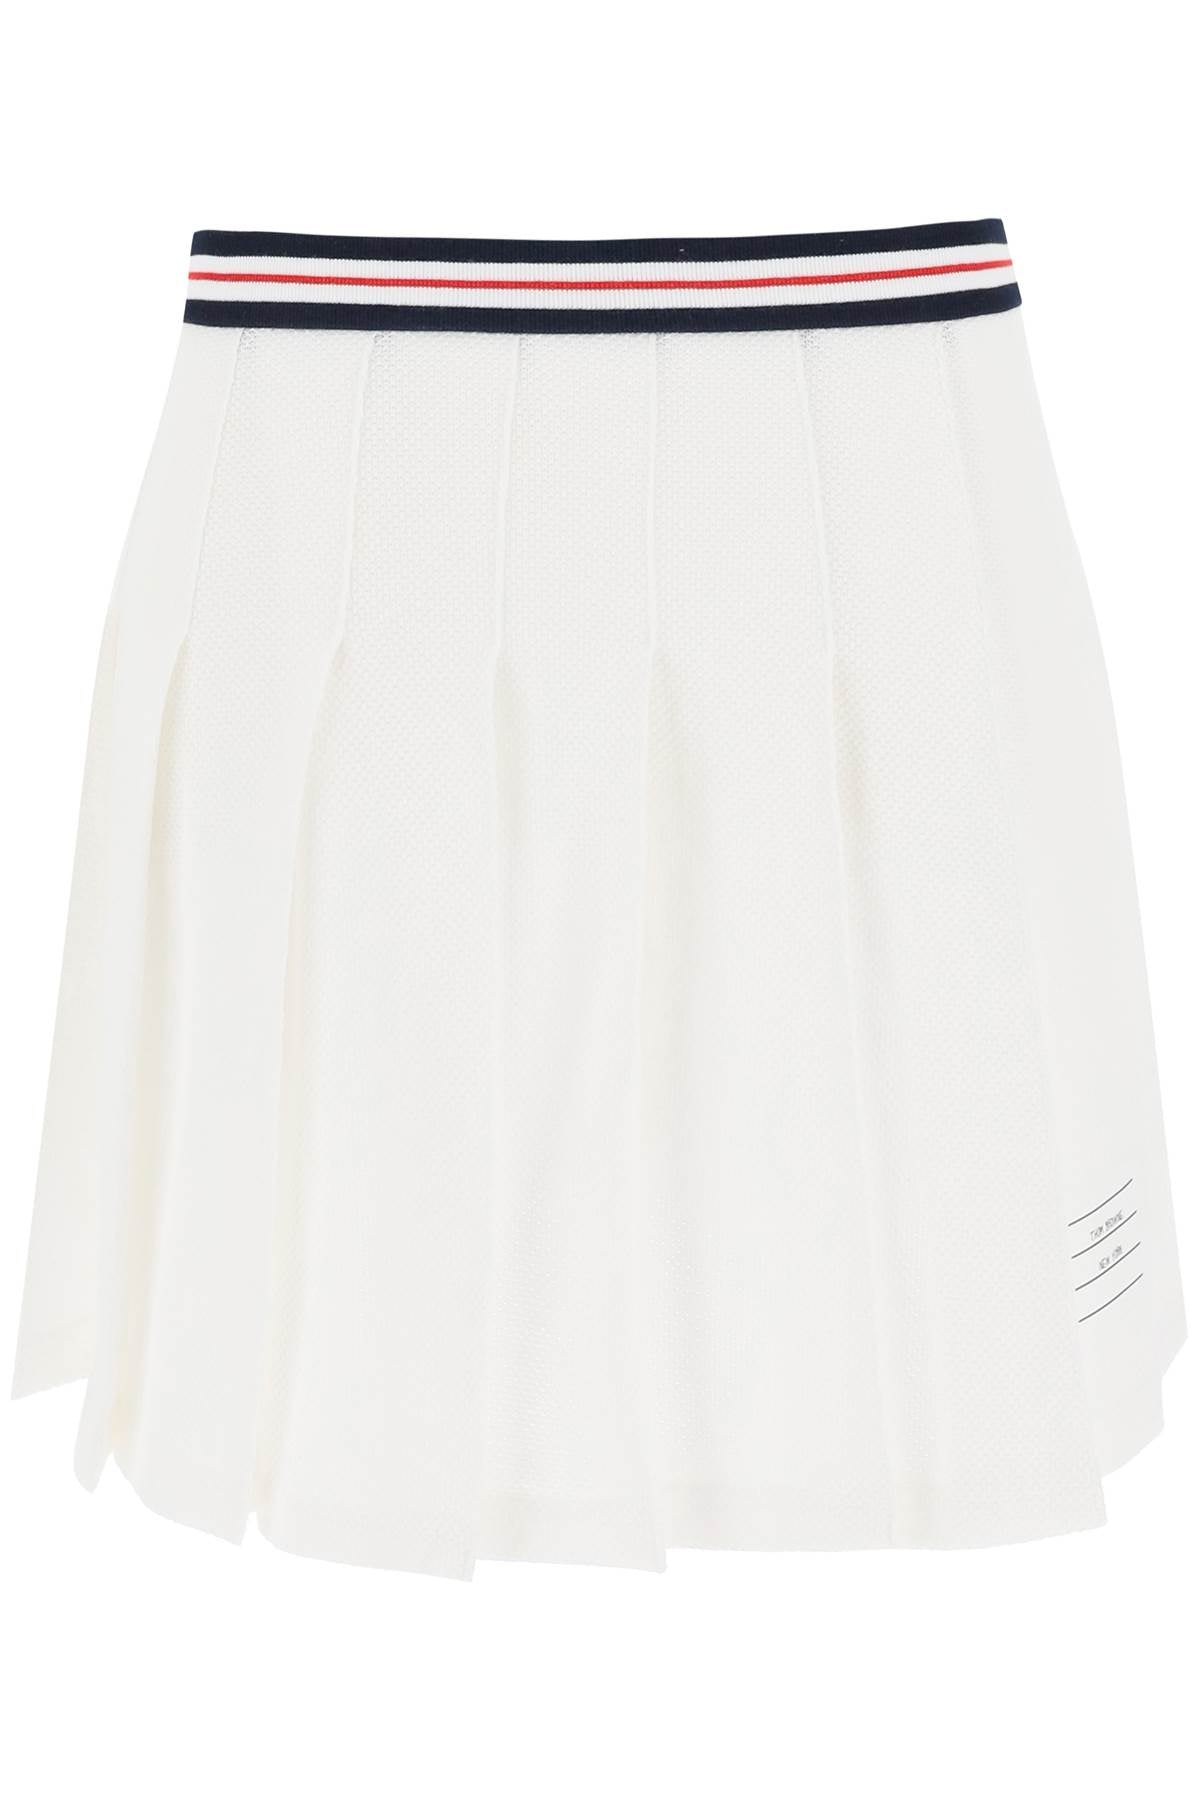 THOM BROWNE PLEATED MINI SKIRT IN TESTURIZED COTTON KNIT